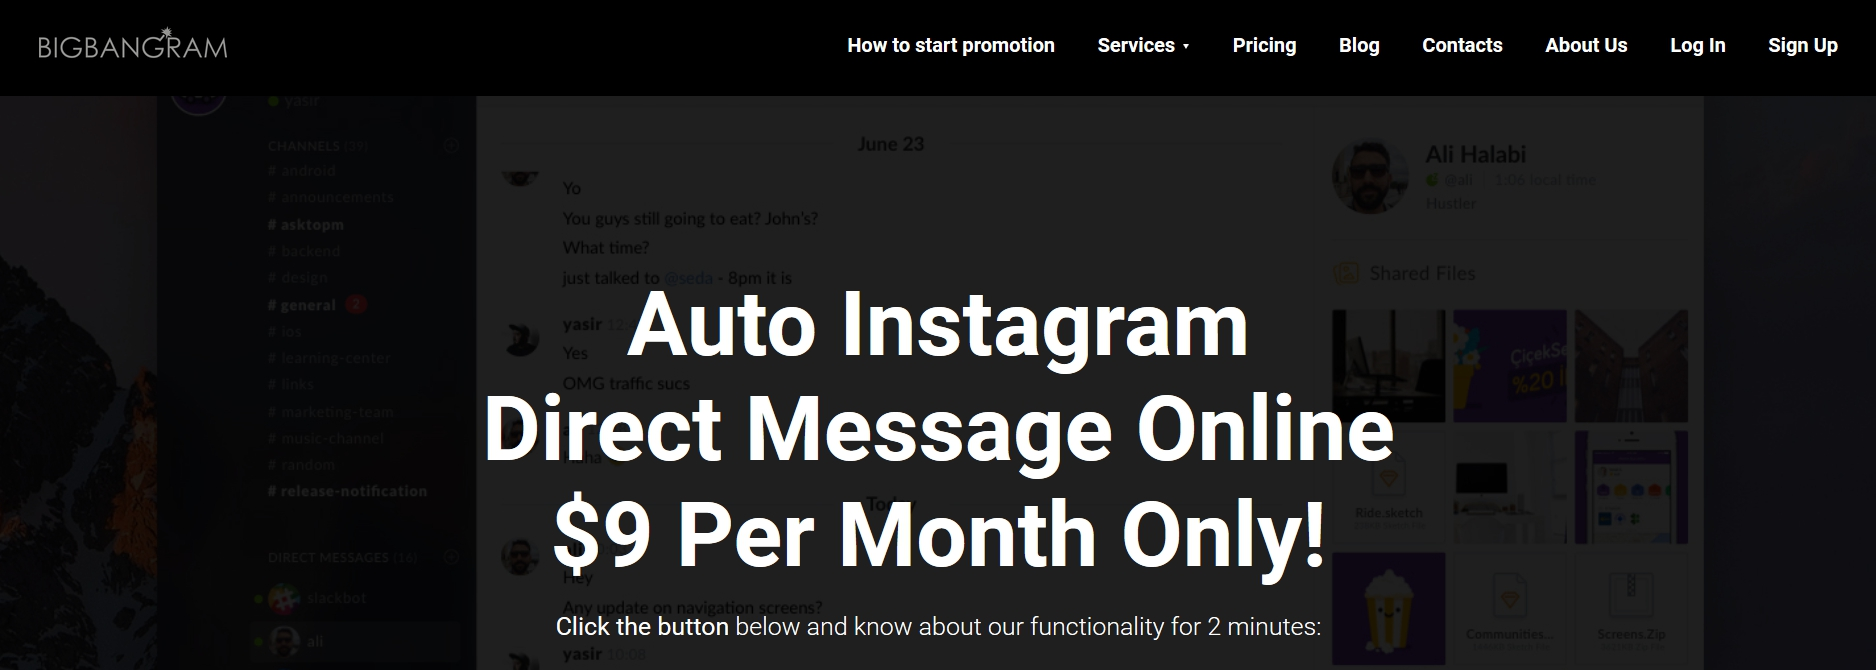 5 best online automation services with instagram direct message option 2019 - send automated instagram direct messages instagram auto direct